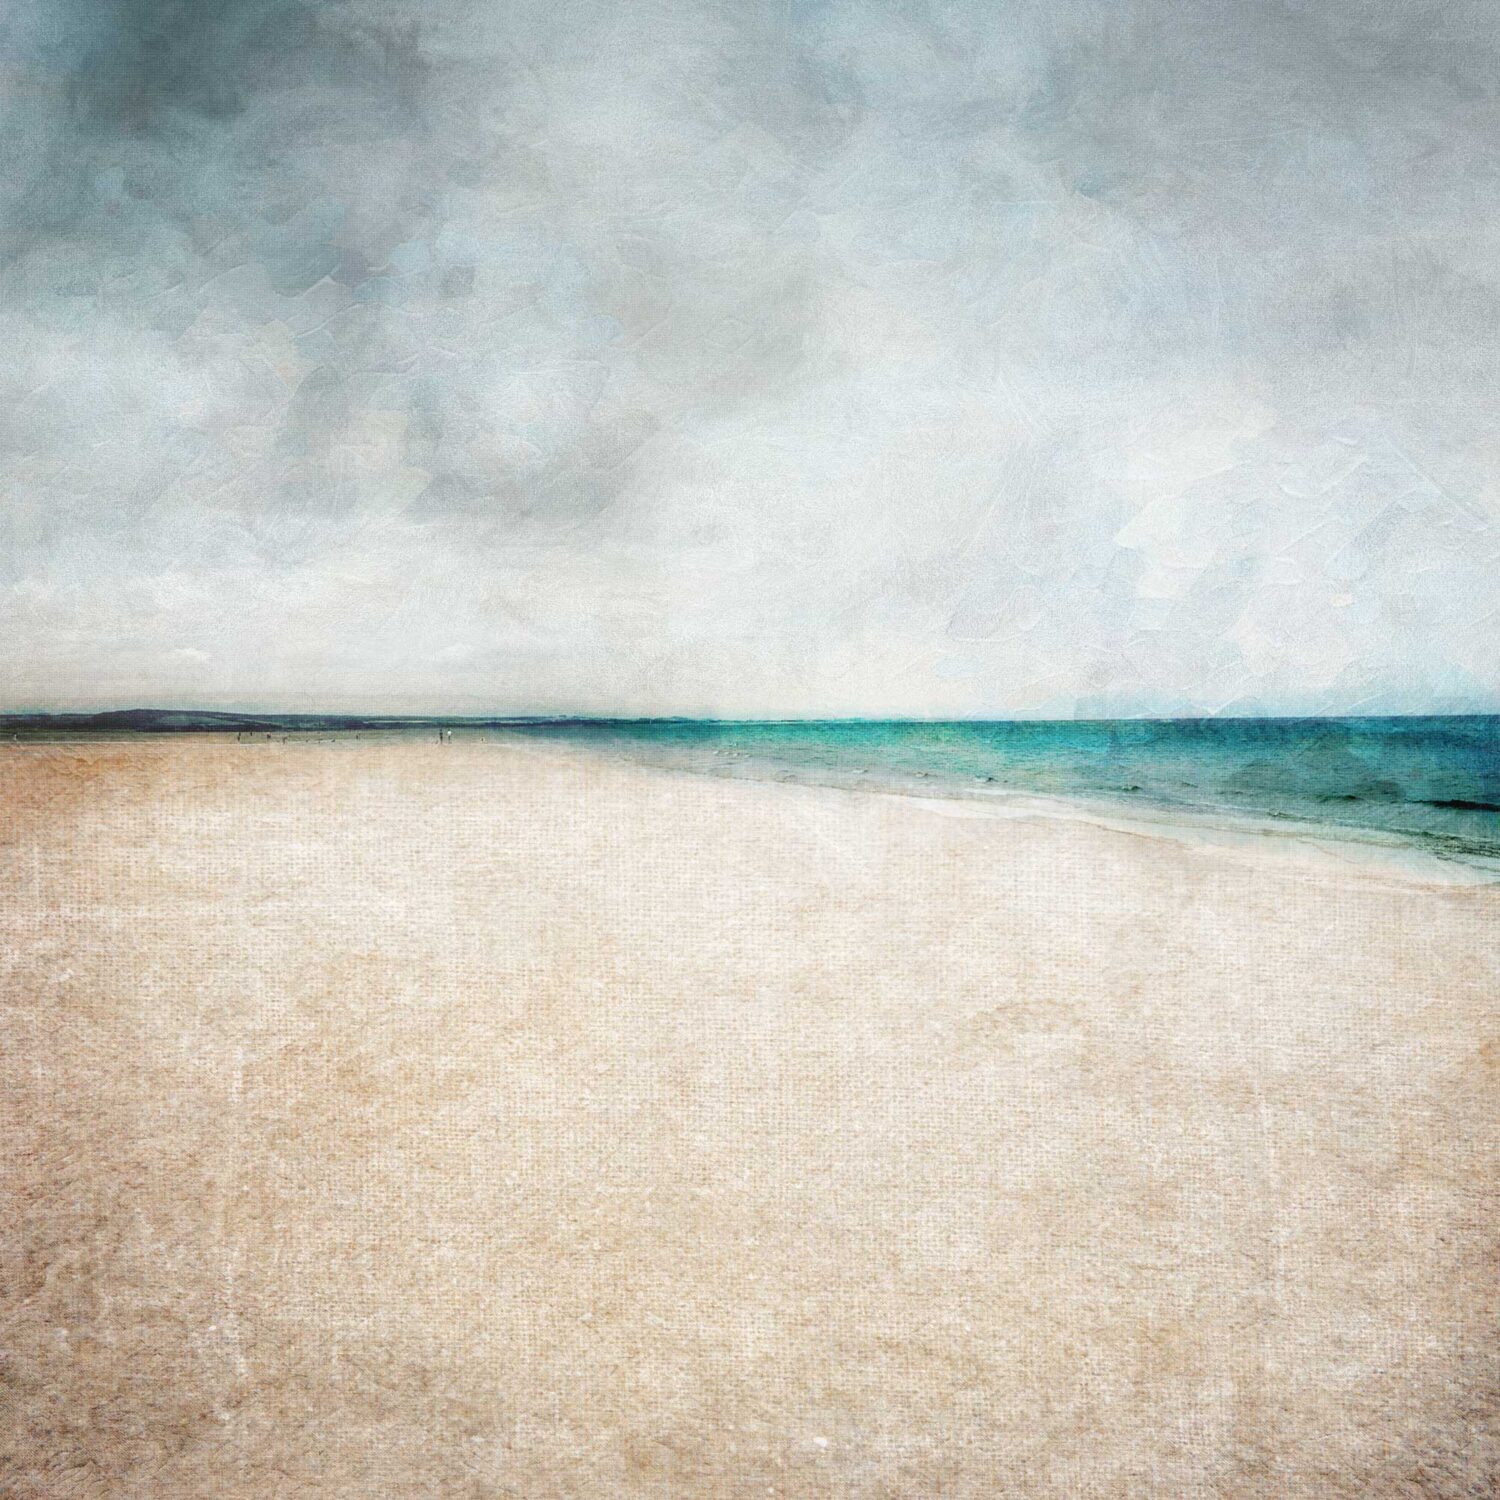 abstract artwork of Kinshaldy beach with the blue green sea in the middle and grey textured sky above. There are 2 peopls walking a dog in the distance and the sand in the bottom half of the artwork has a canvas texture.